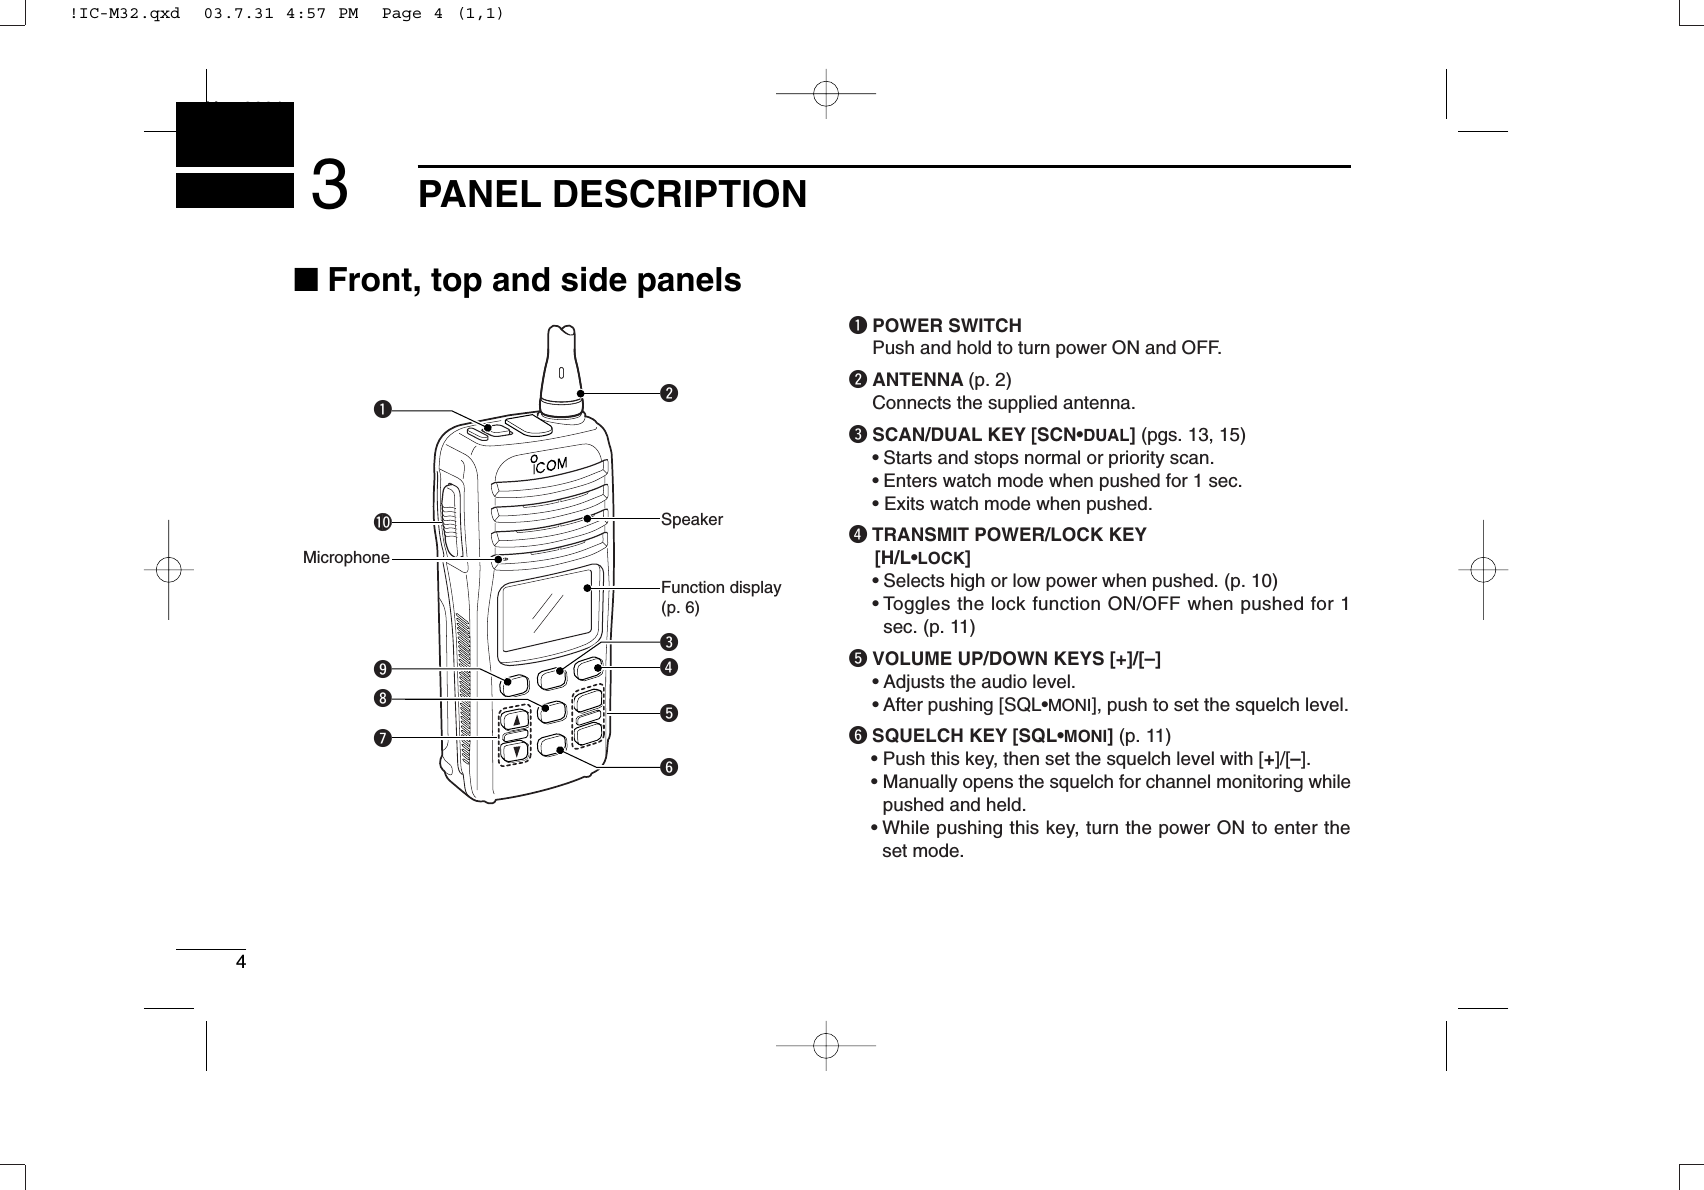 4PANEL DESCRIPTIONNew20013■Front, top and side panelsqPOWER SWITCHPush and hold to turn power ON and OFF.wANTENNA (p. 2)Connects the supplied antenna.eSCAN/DUAL KEY [SCN•DUAL] (pgs. 13, 15)•Starts and stops normal or priority scan.•Enters watch mode when pushed for 1 sec.• Exits watch mode when pushed.rTRANSMIT POWER/LOCK KEY[H/L•LOCK]•Selects high or low power when pushed. (p. 10)•Toggles the lock function ON/OFF when pushed for 1sec. (p. 11)tVOLUME UP/DOWN KEYS [+]/[–]•Adjusts the audio level.• After pushing [SQL•MONI], push to set the squelch level.ySQUELCH KEY [SQL•MONI] (p. 11)•Push this key, then set the squelch level with [+]/[–].• Manually opens the squelch for channel monitoring whilepushed and held.•While pushing this key, turn the power ON to enter theset mode.rqoui!0wyteMicrophoneFunction display (p. 6)Speaker!IC-M32.qxd  03.7.31 4:57 PM  Page 4 (1,1)